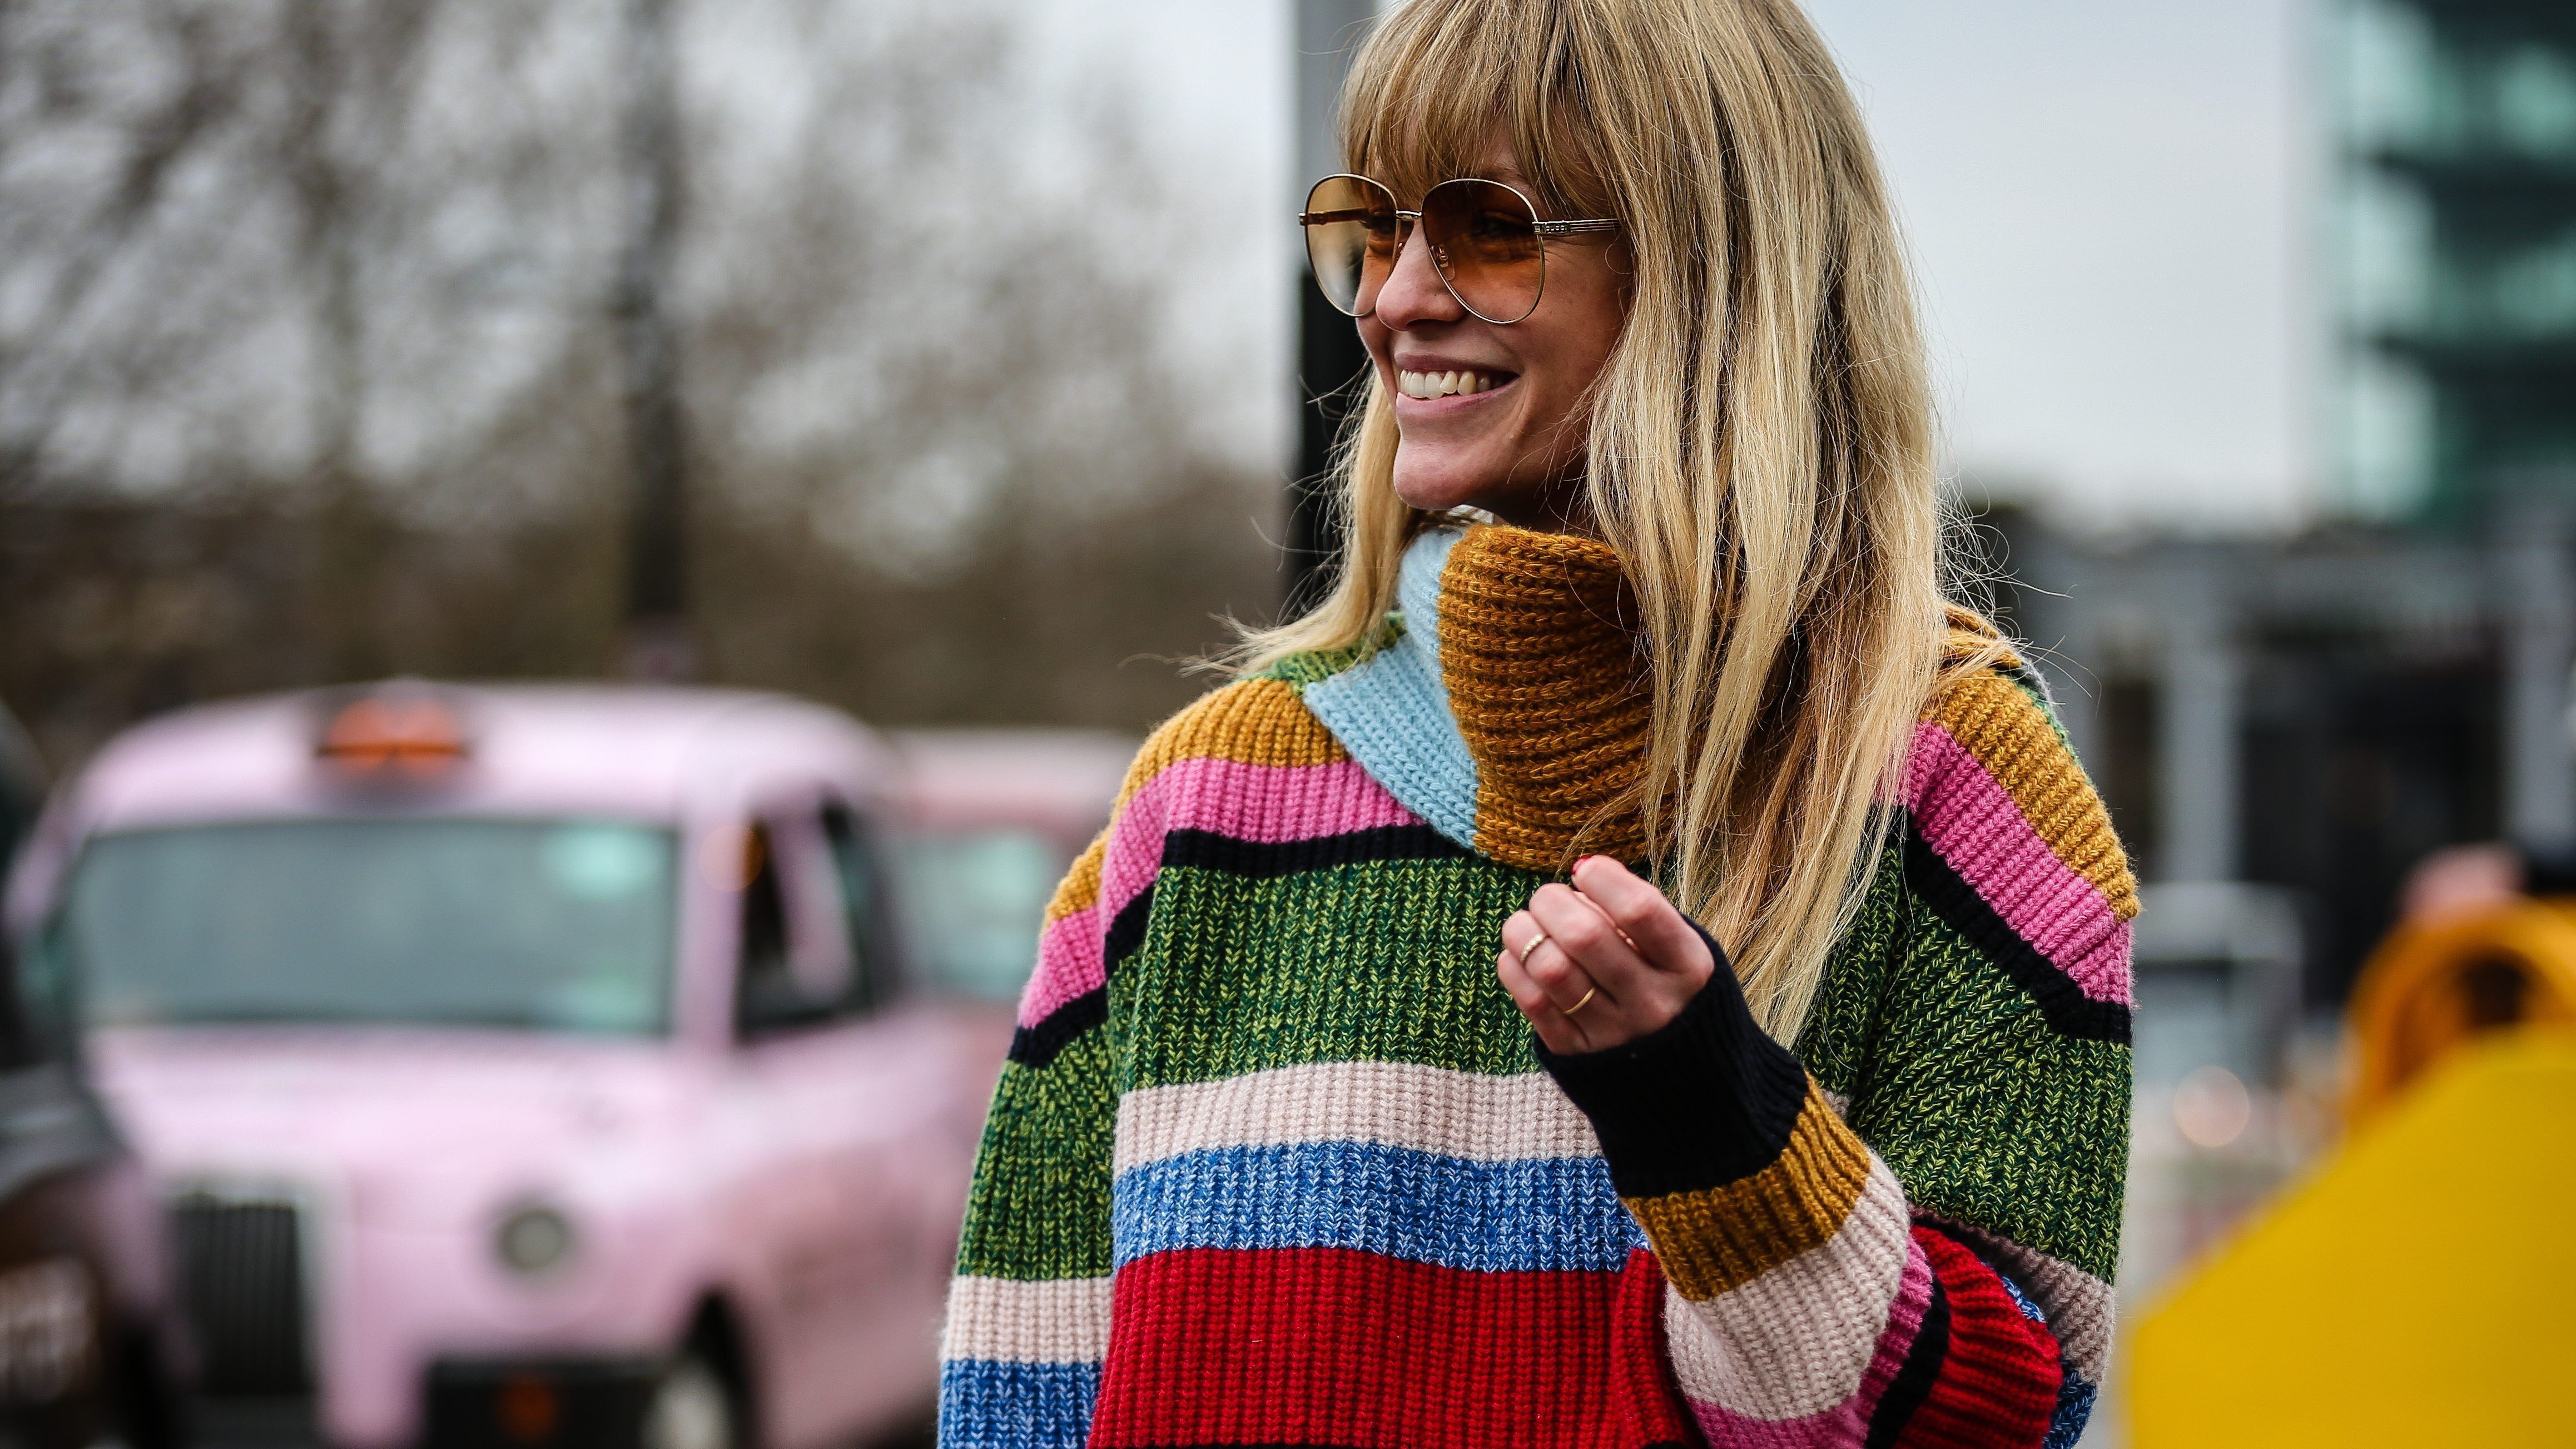 LONDON, UK- February 16 2019: Jeanette Friis Madsen on the street during the London Fashion Week. (Photo by Mauro Del Signore/Pacific Press)